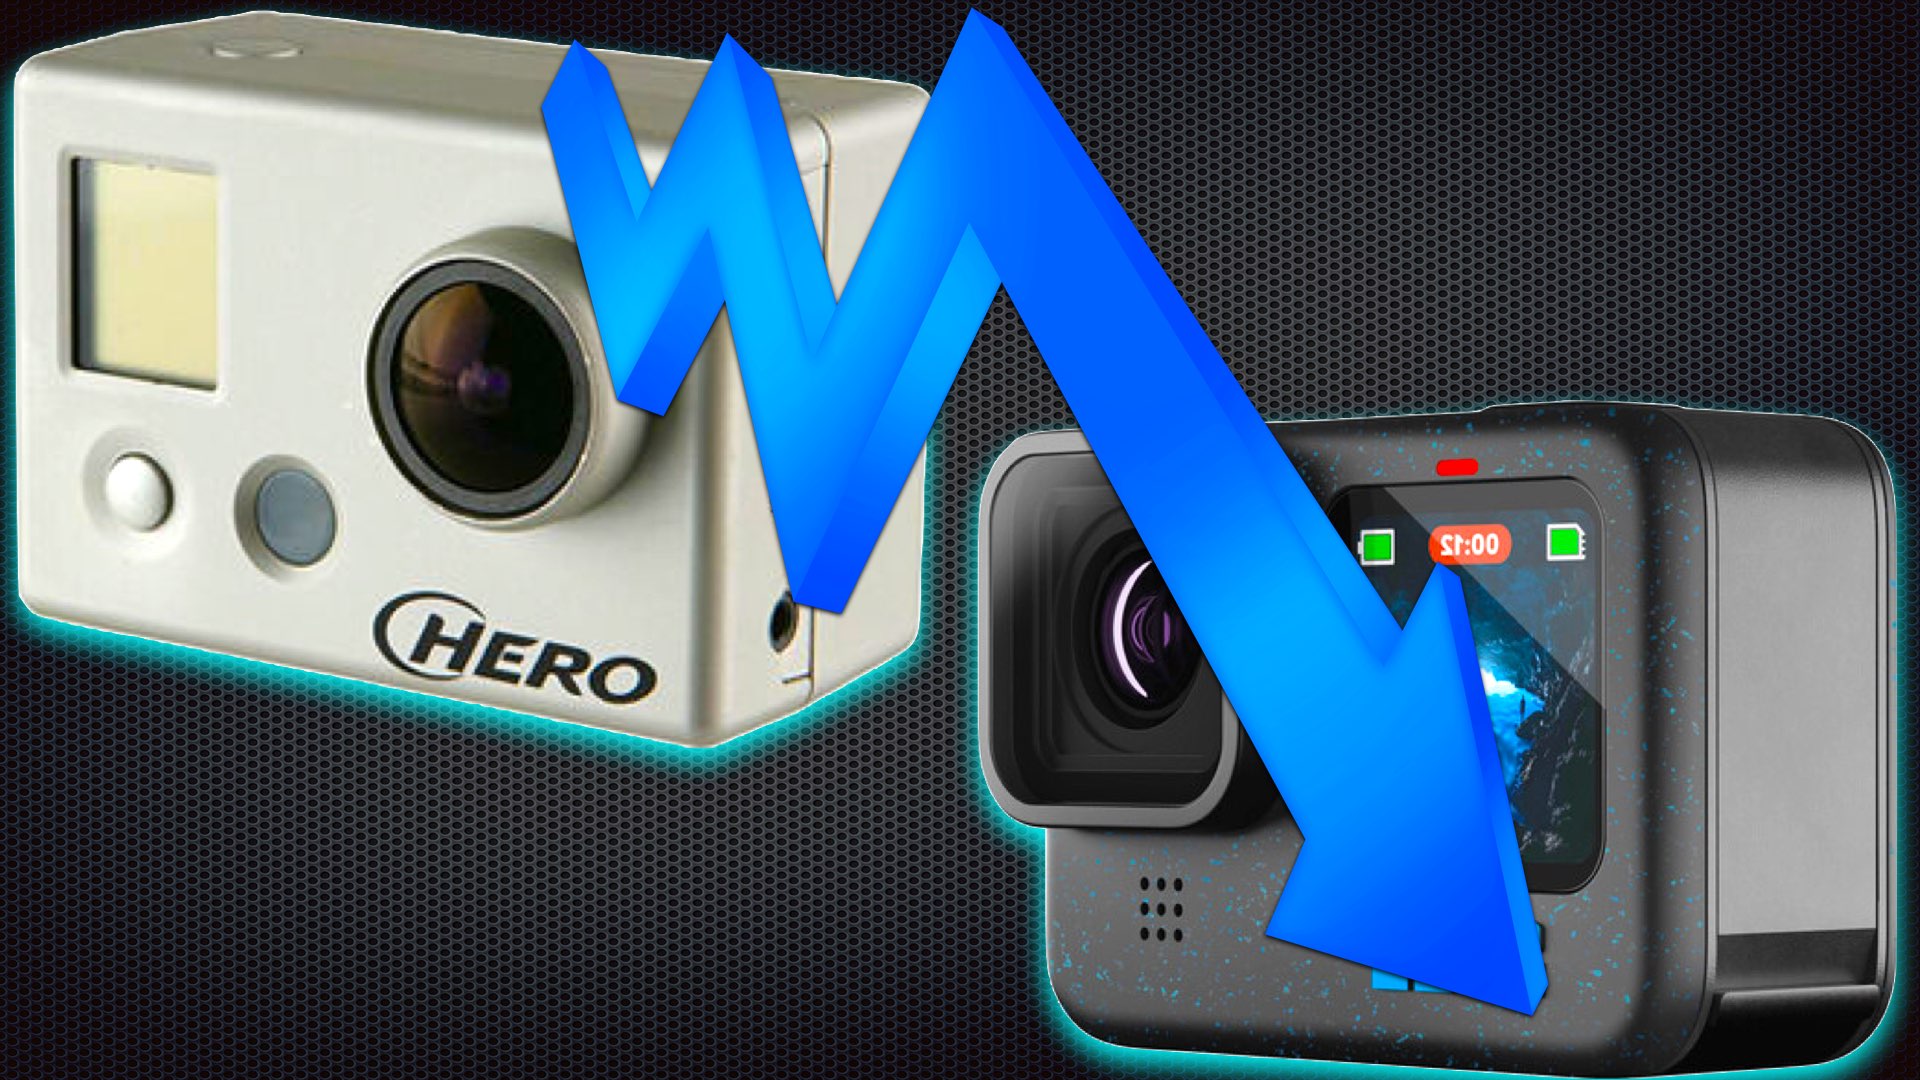 Will GoPro Ever Recover?